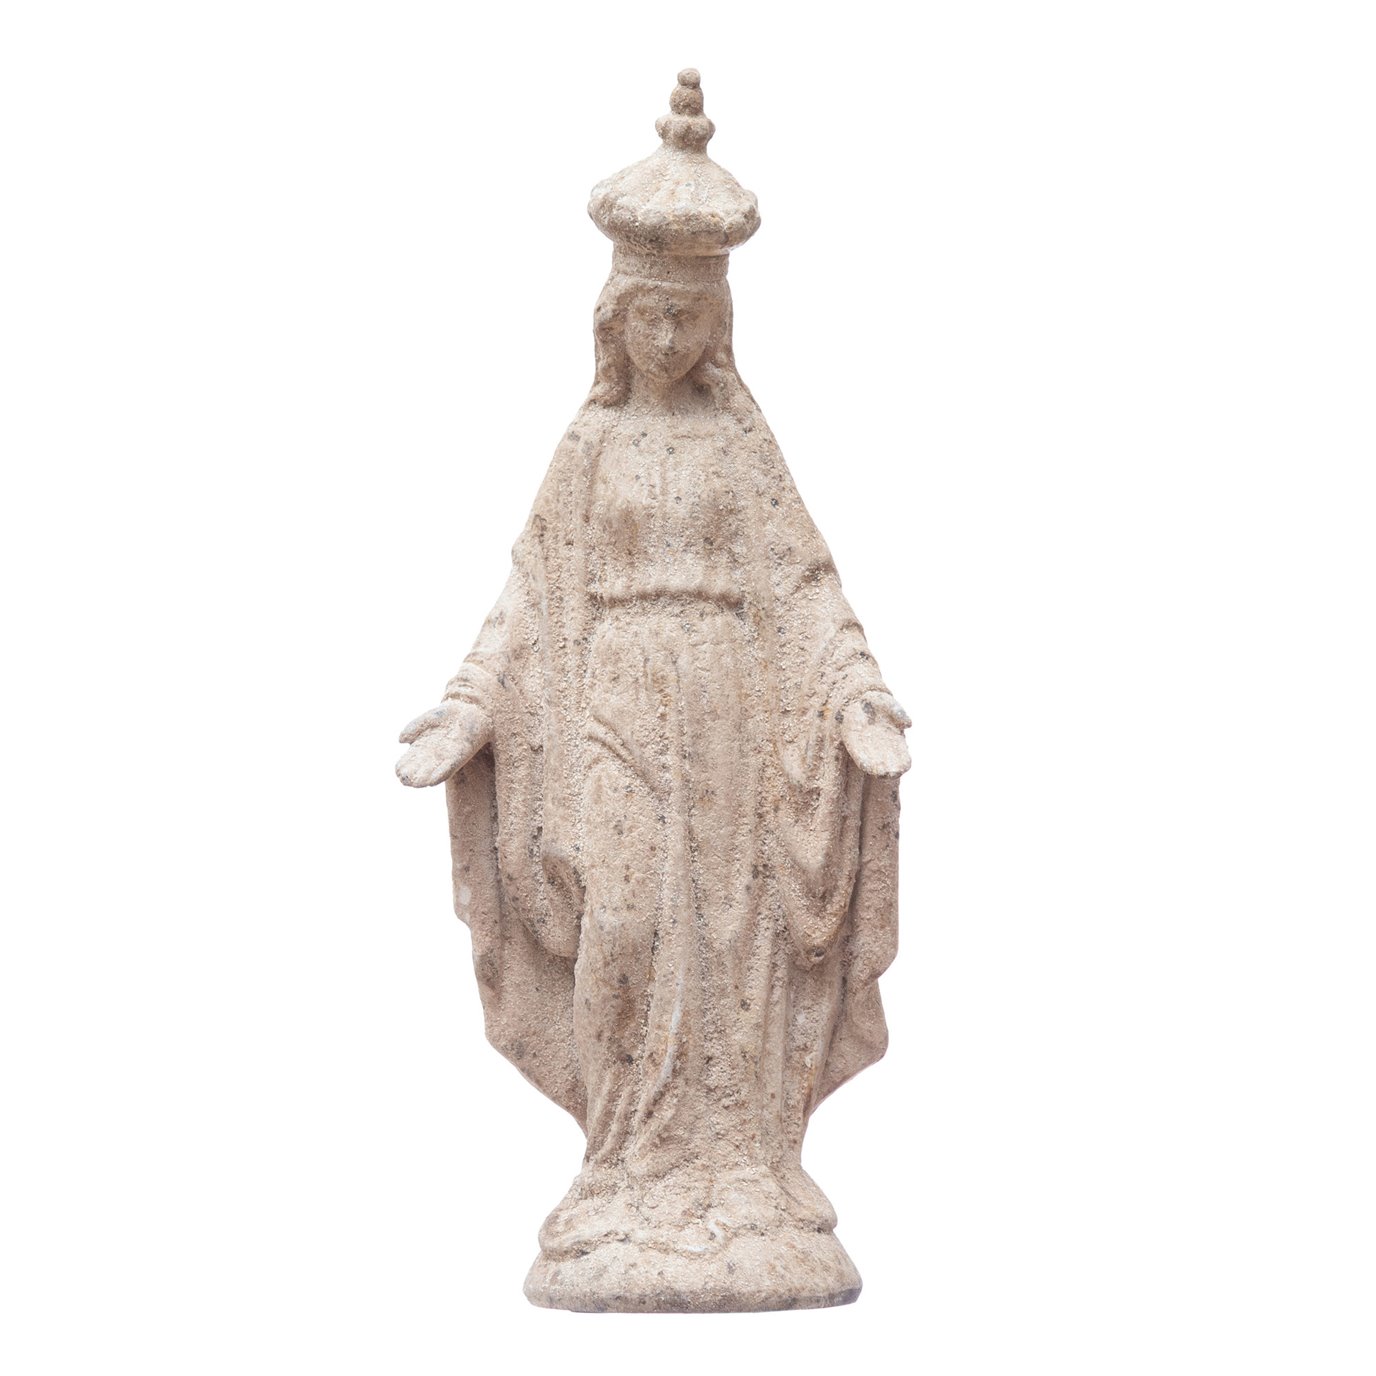 Resin Vintage Reproduction Virgin Mary Statue, Distressed Finish